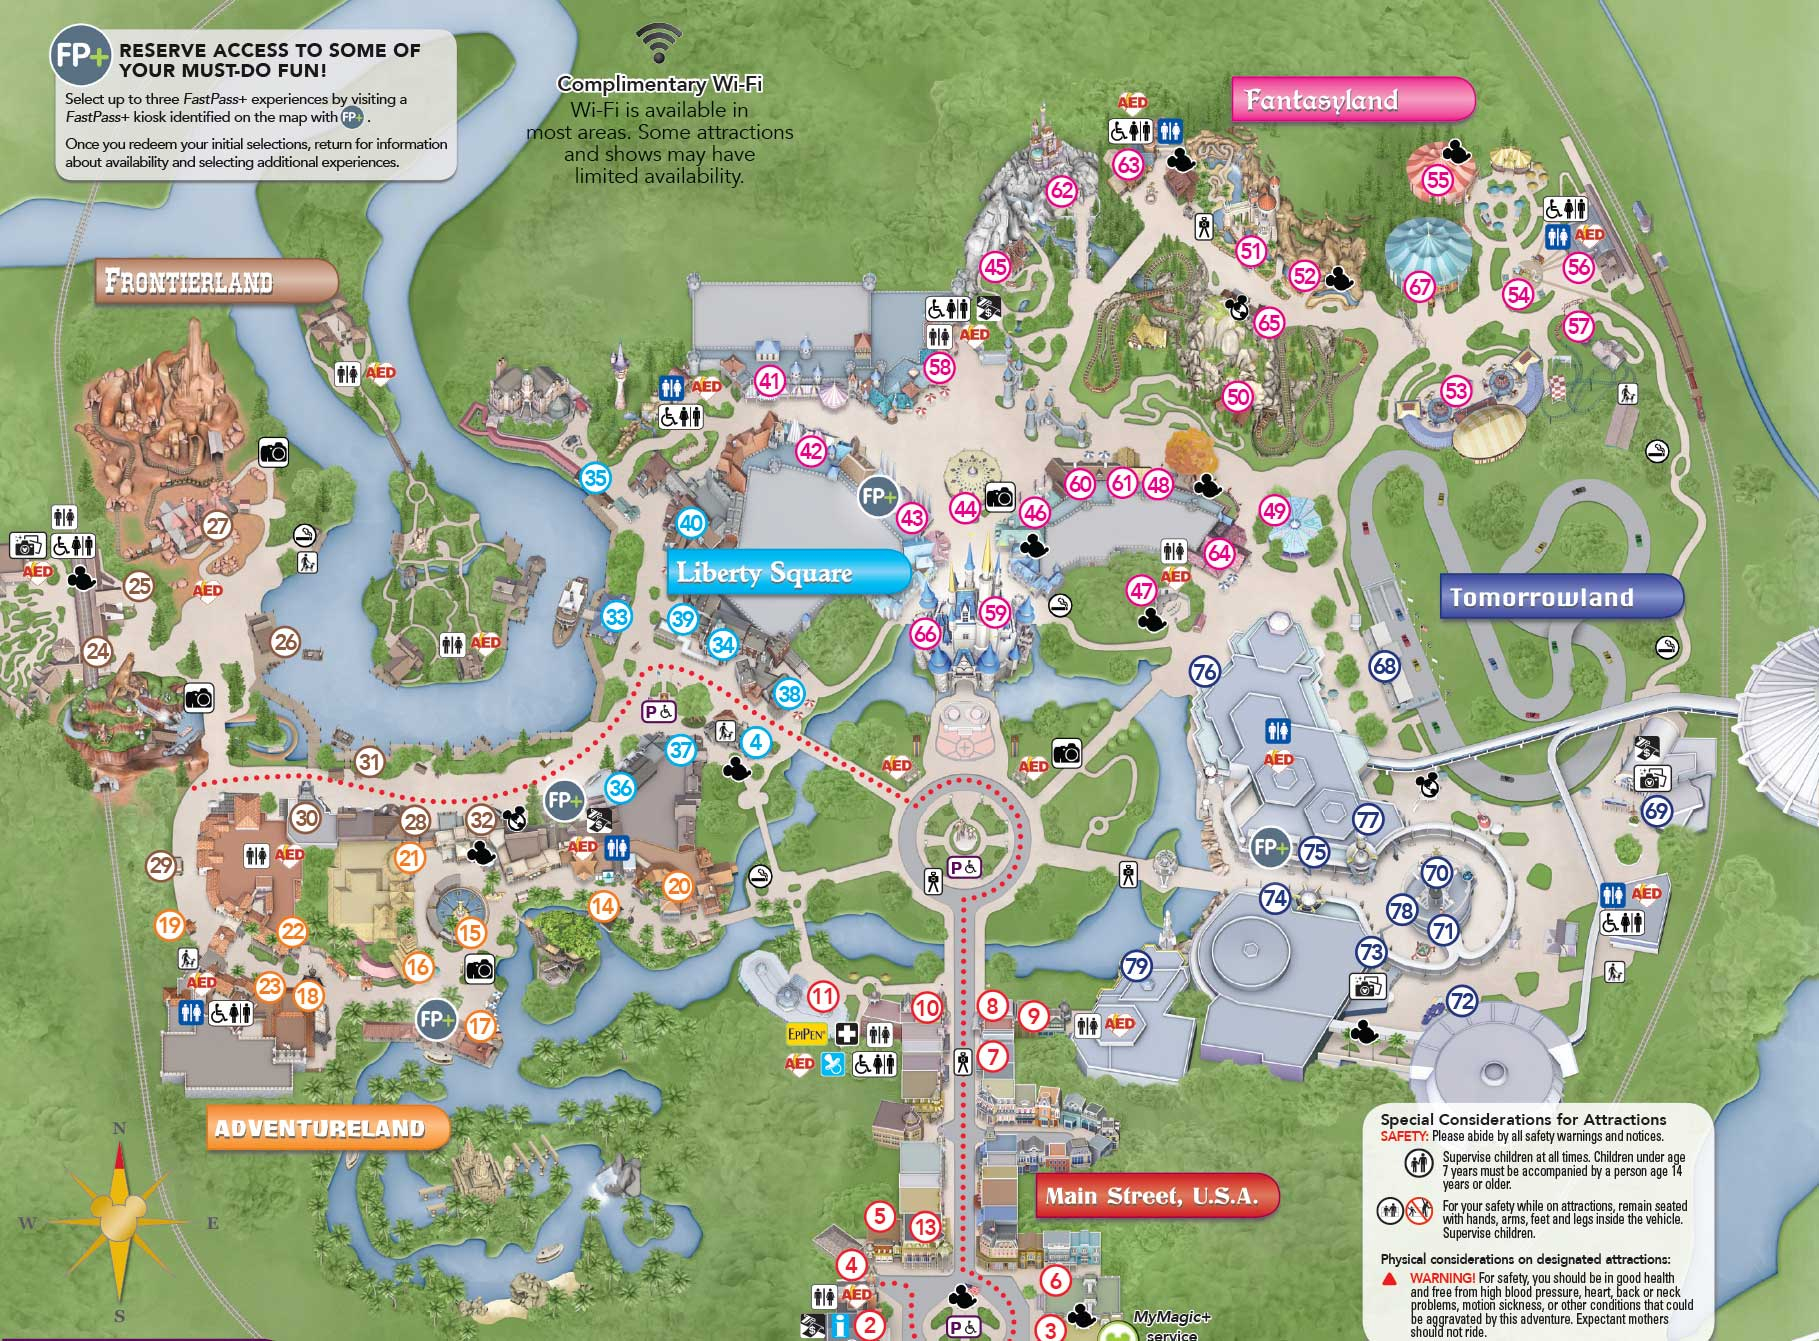 PHOTOS New Magic Kingdom Guide Map Shows Changes To The 